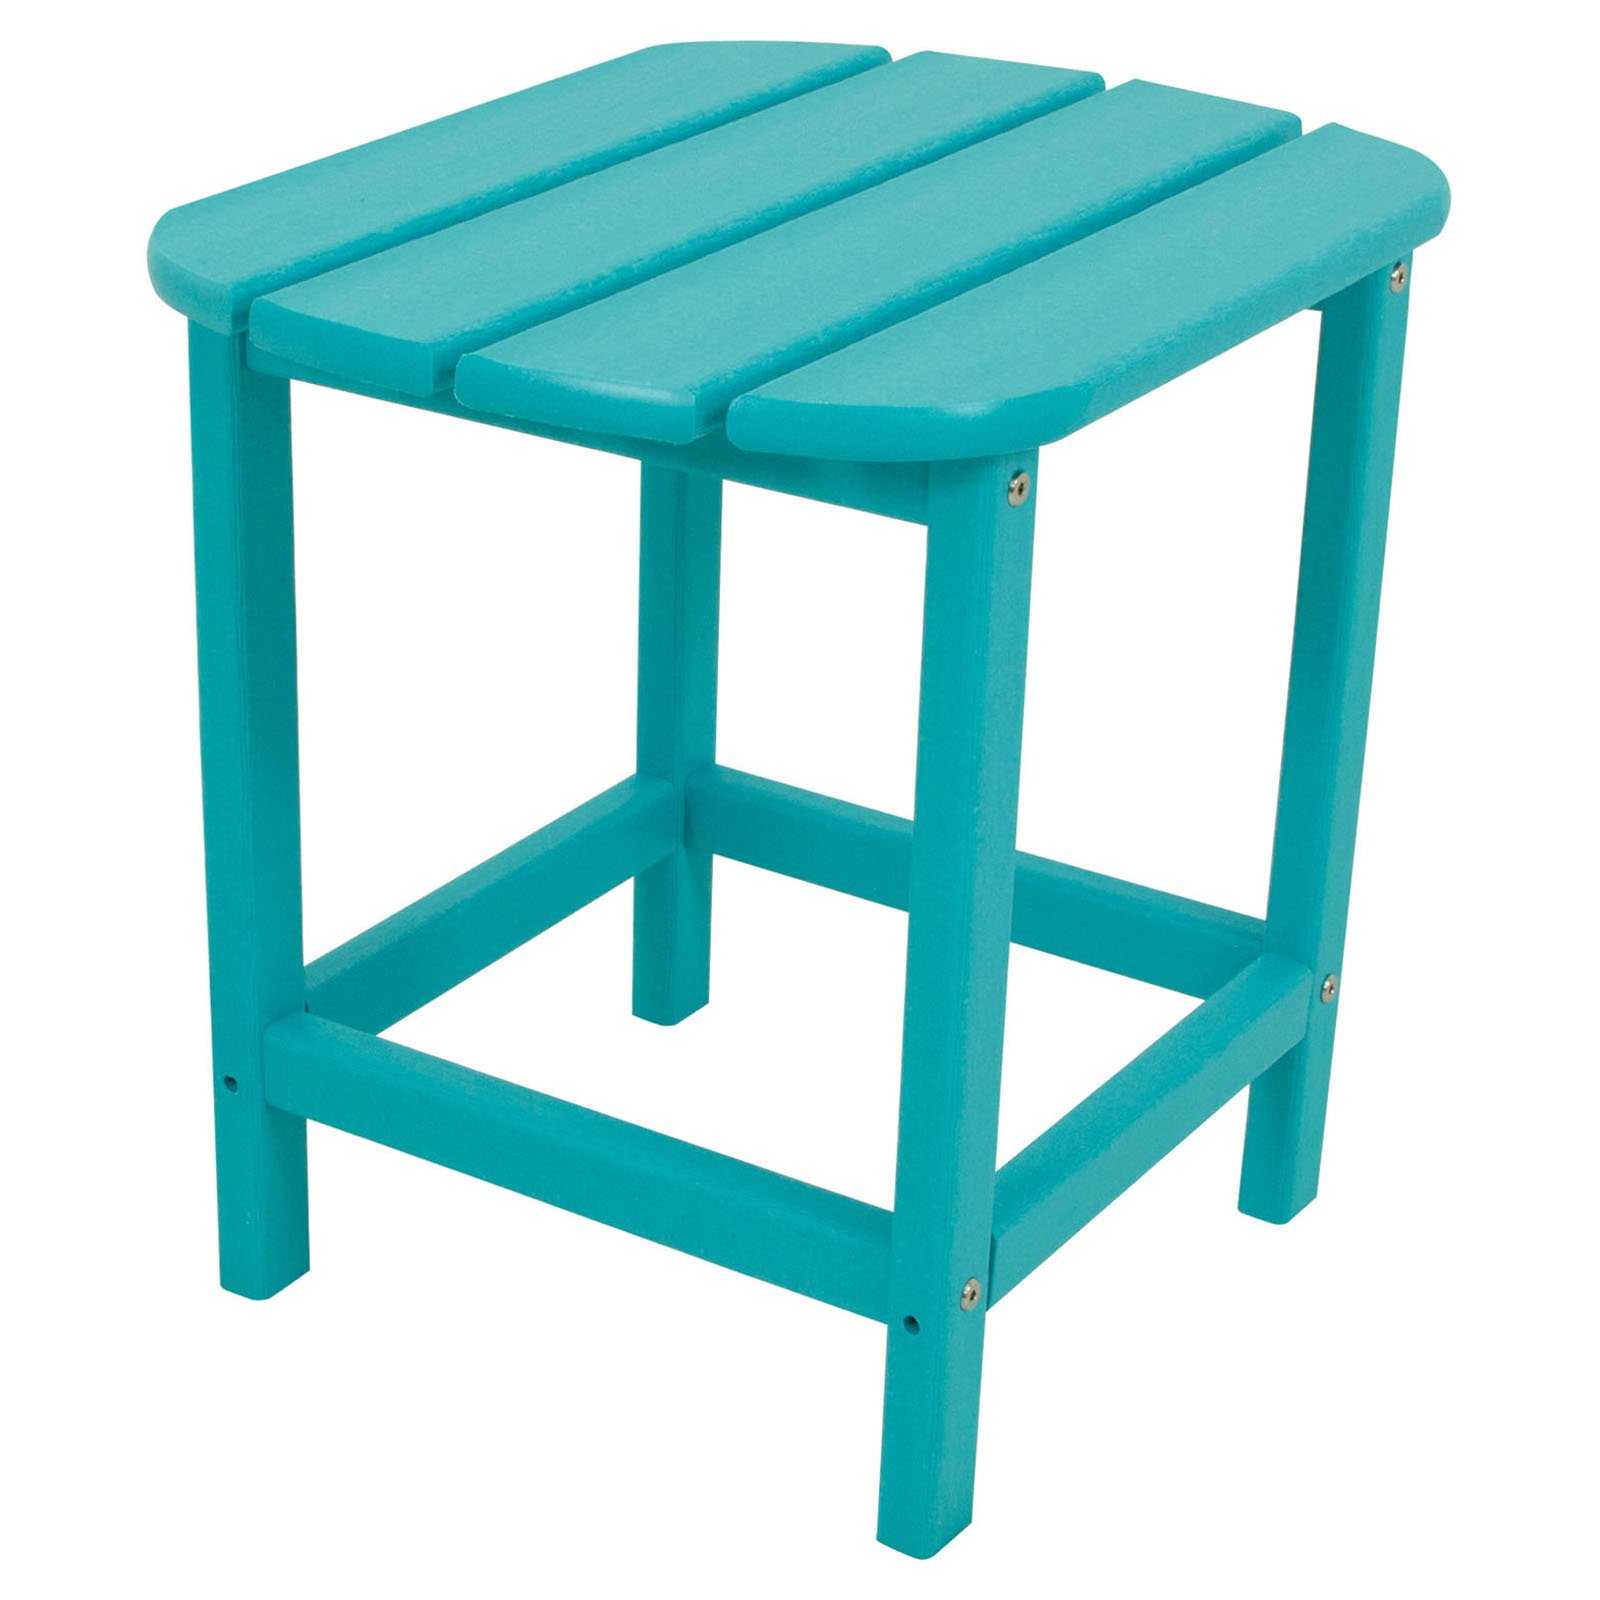 Hanover Outdoor All-Weather Side Table - image 2 of 11